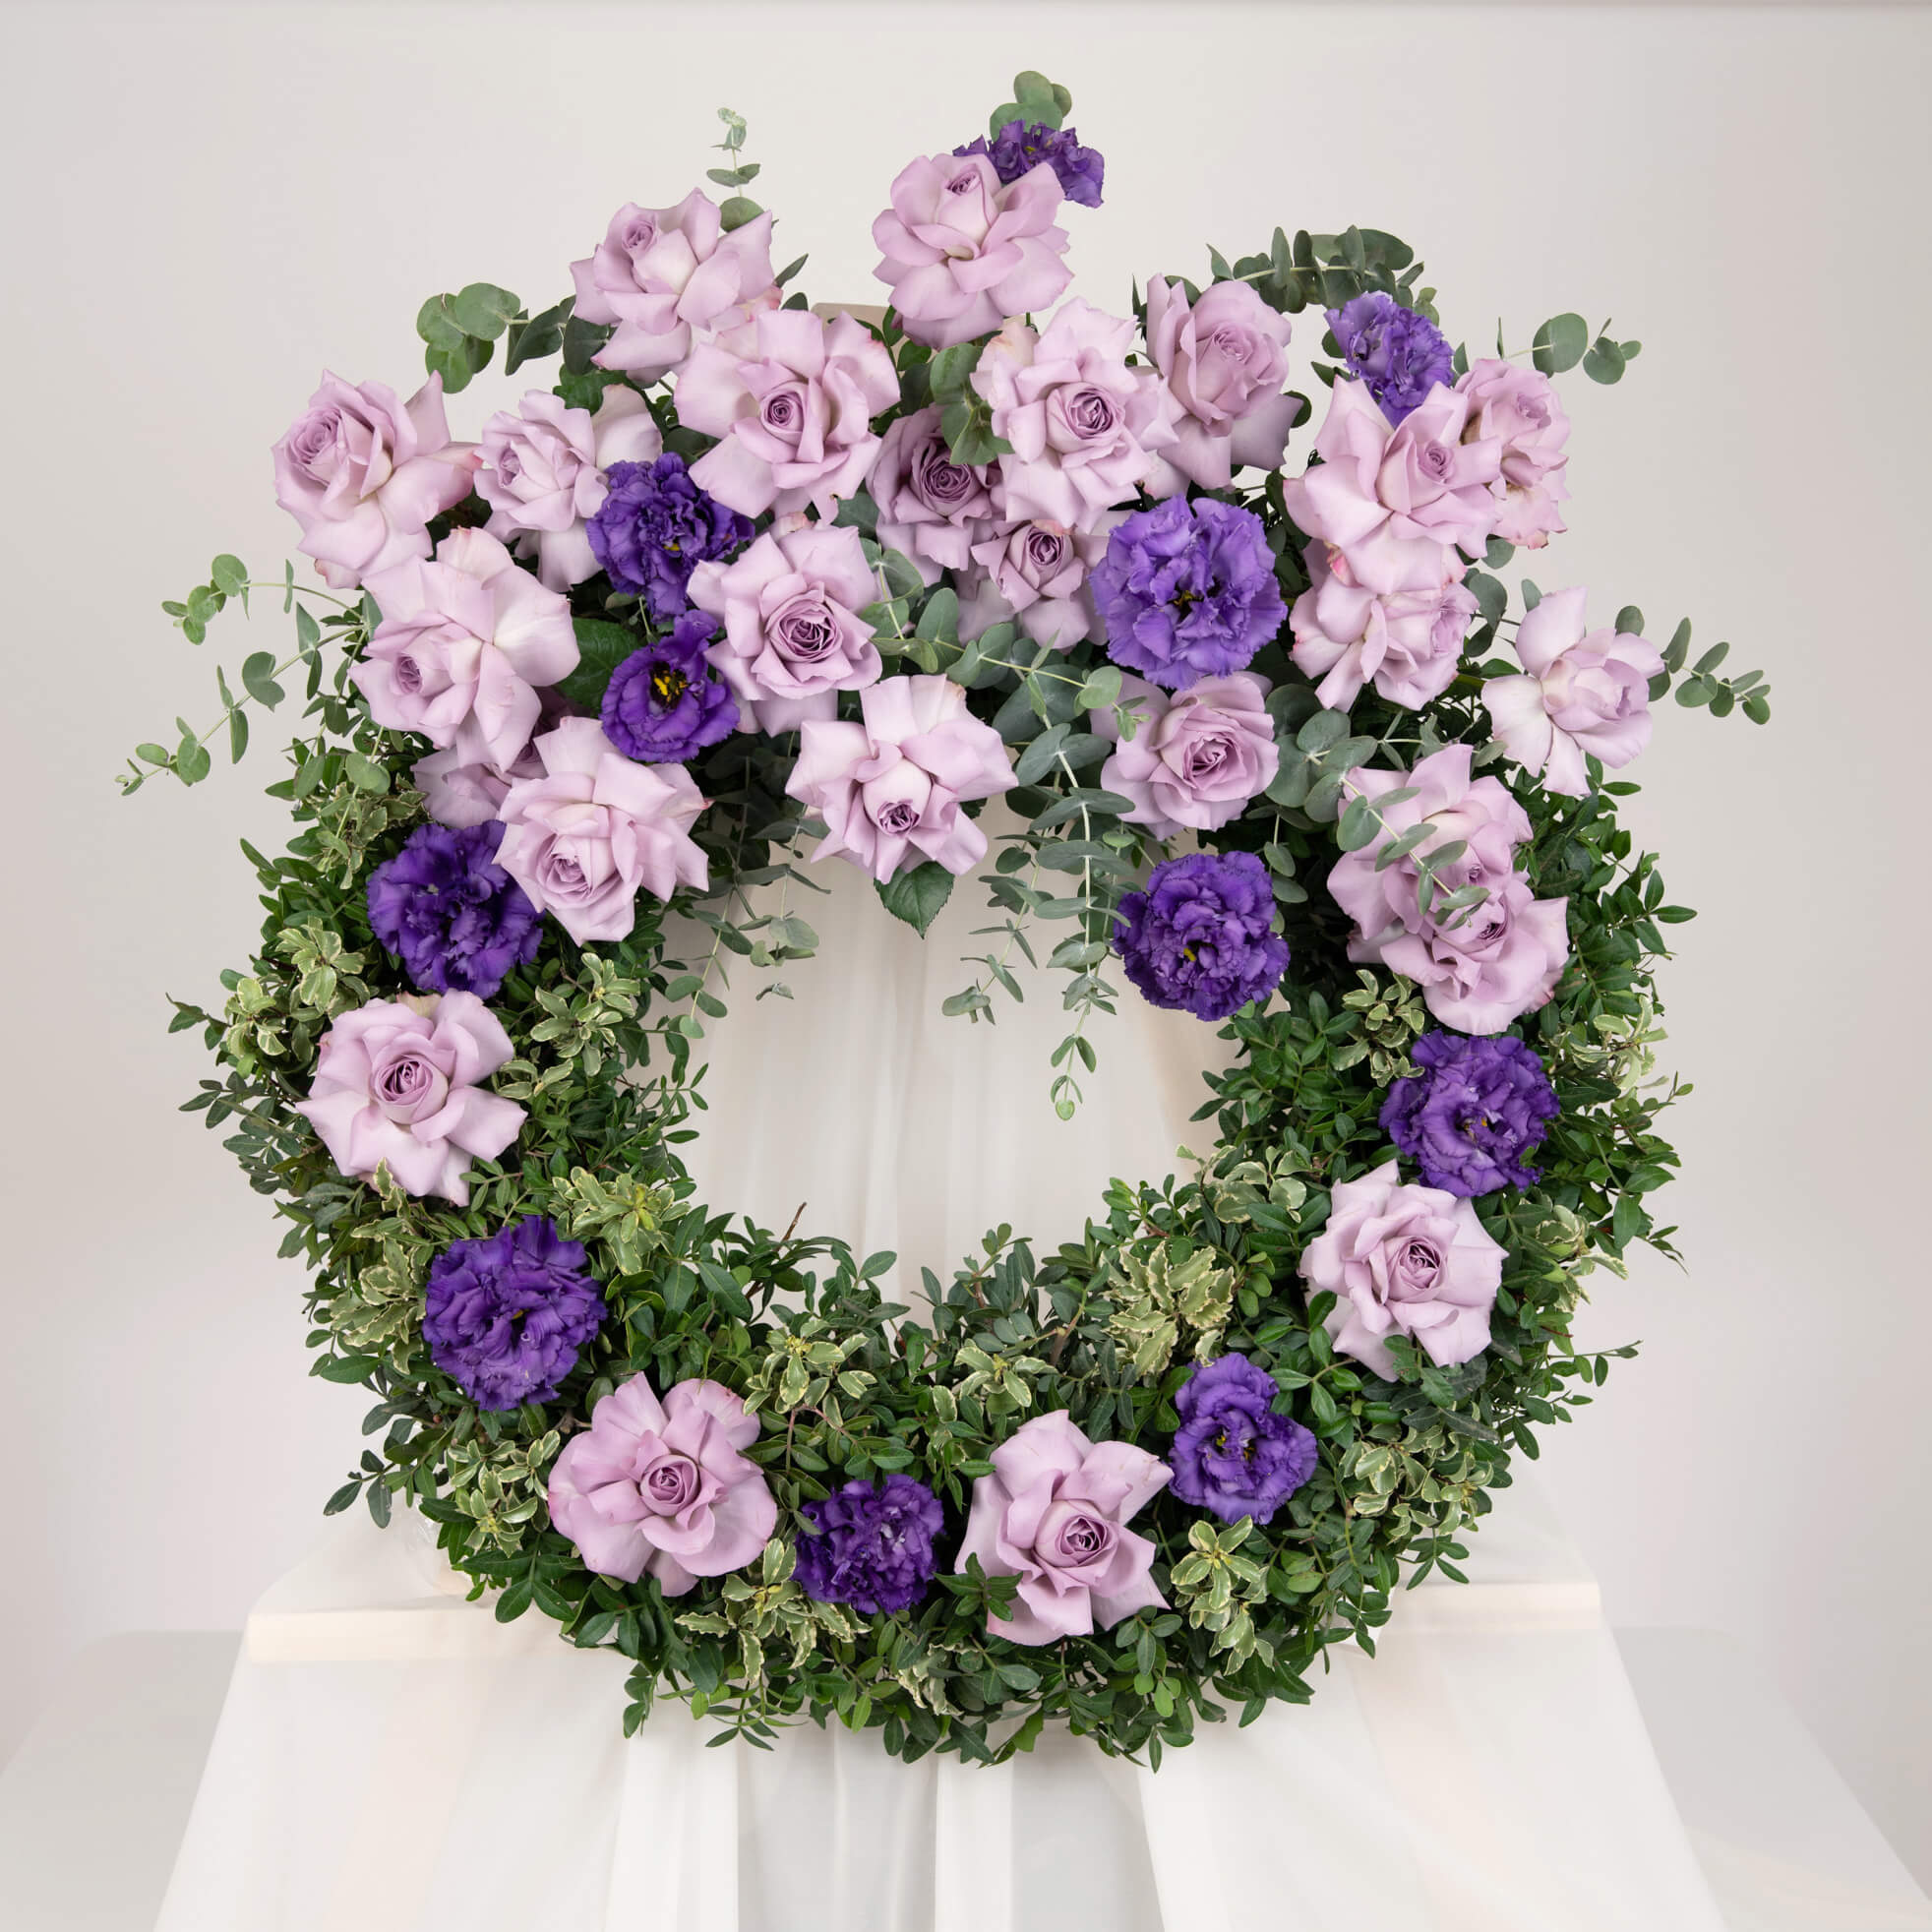 Funeral wreath with purple roses and eucalyptus